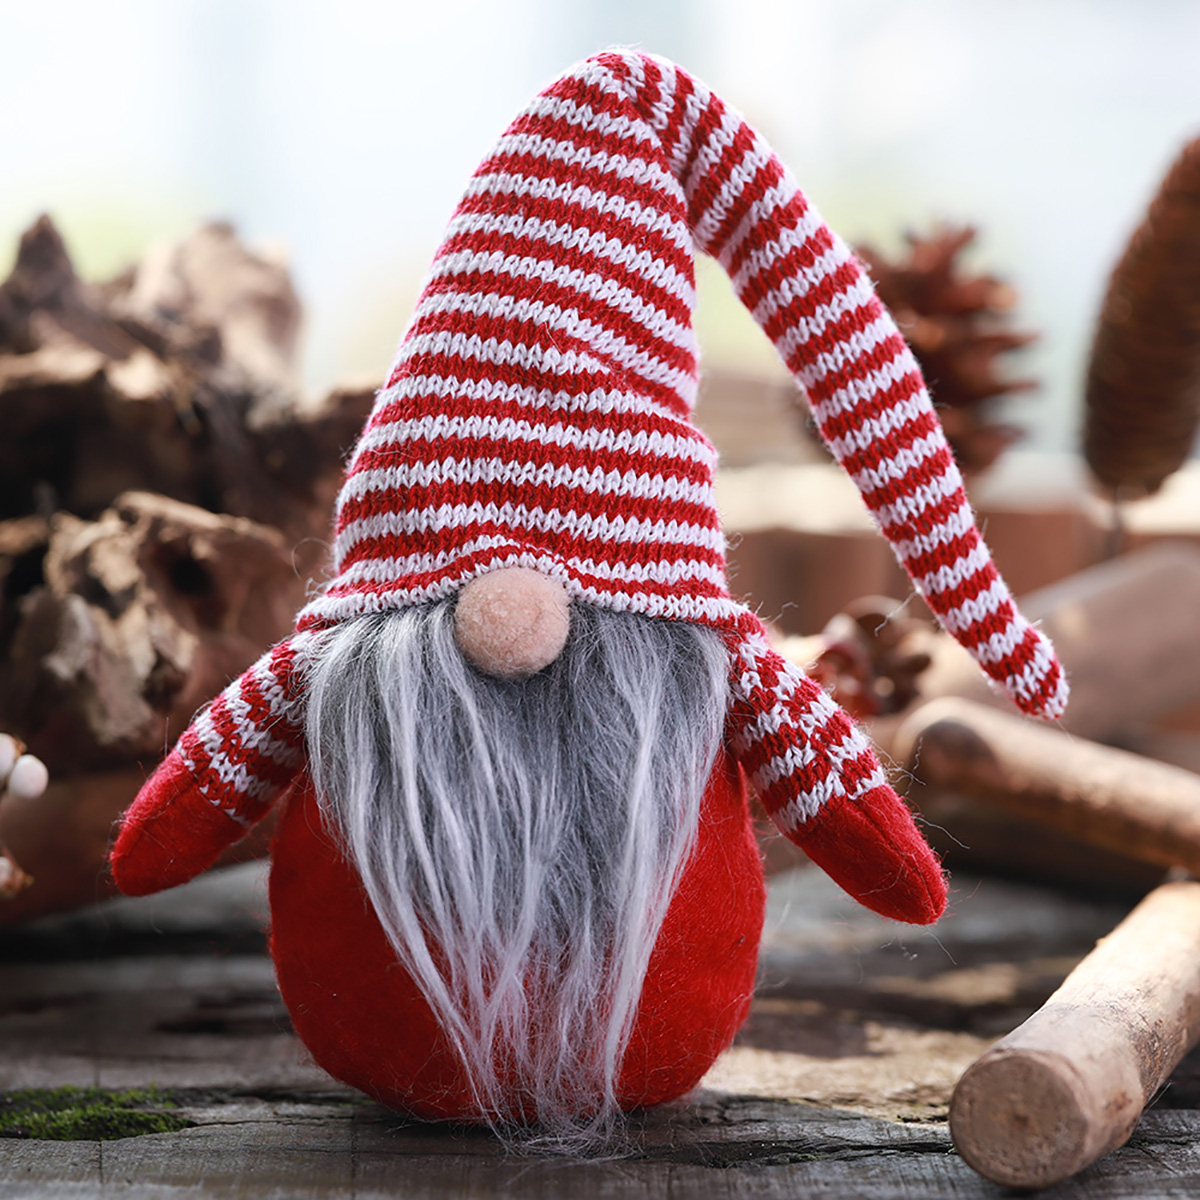 Non-Woven-Hat-With-Long-Legs-Handmade-Gnome-Santa-Christmas-Figurines-Ornament-Decorations-Toys-1636850-8